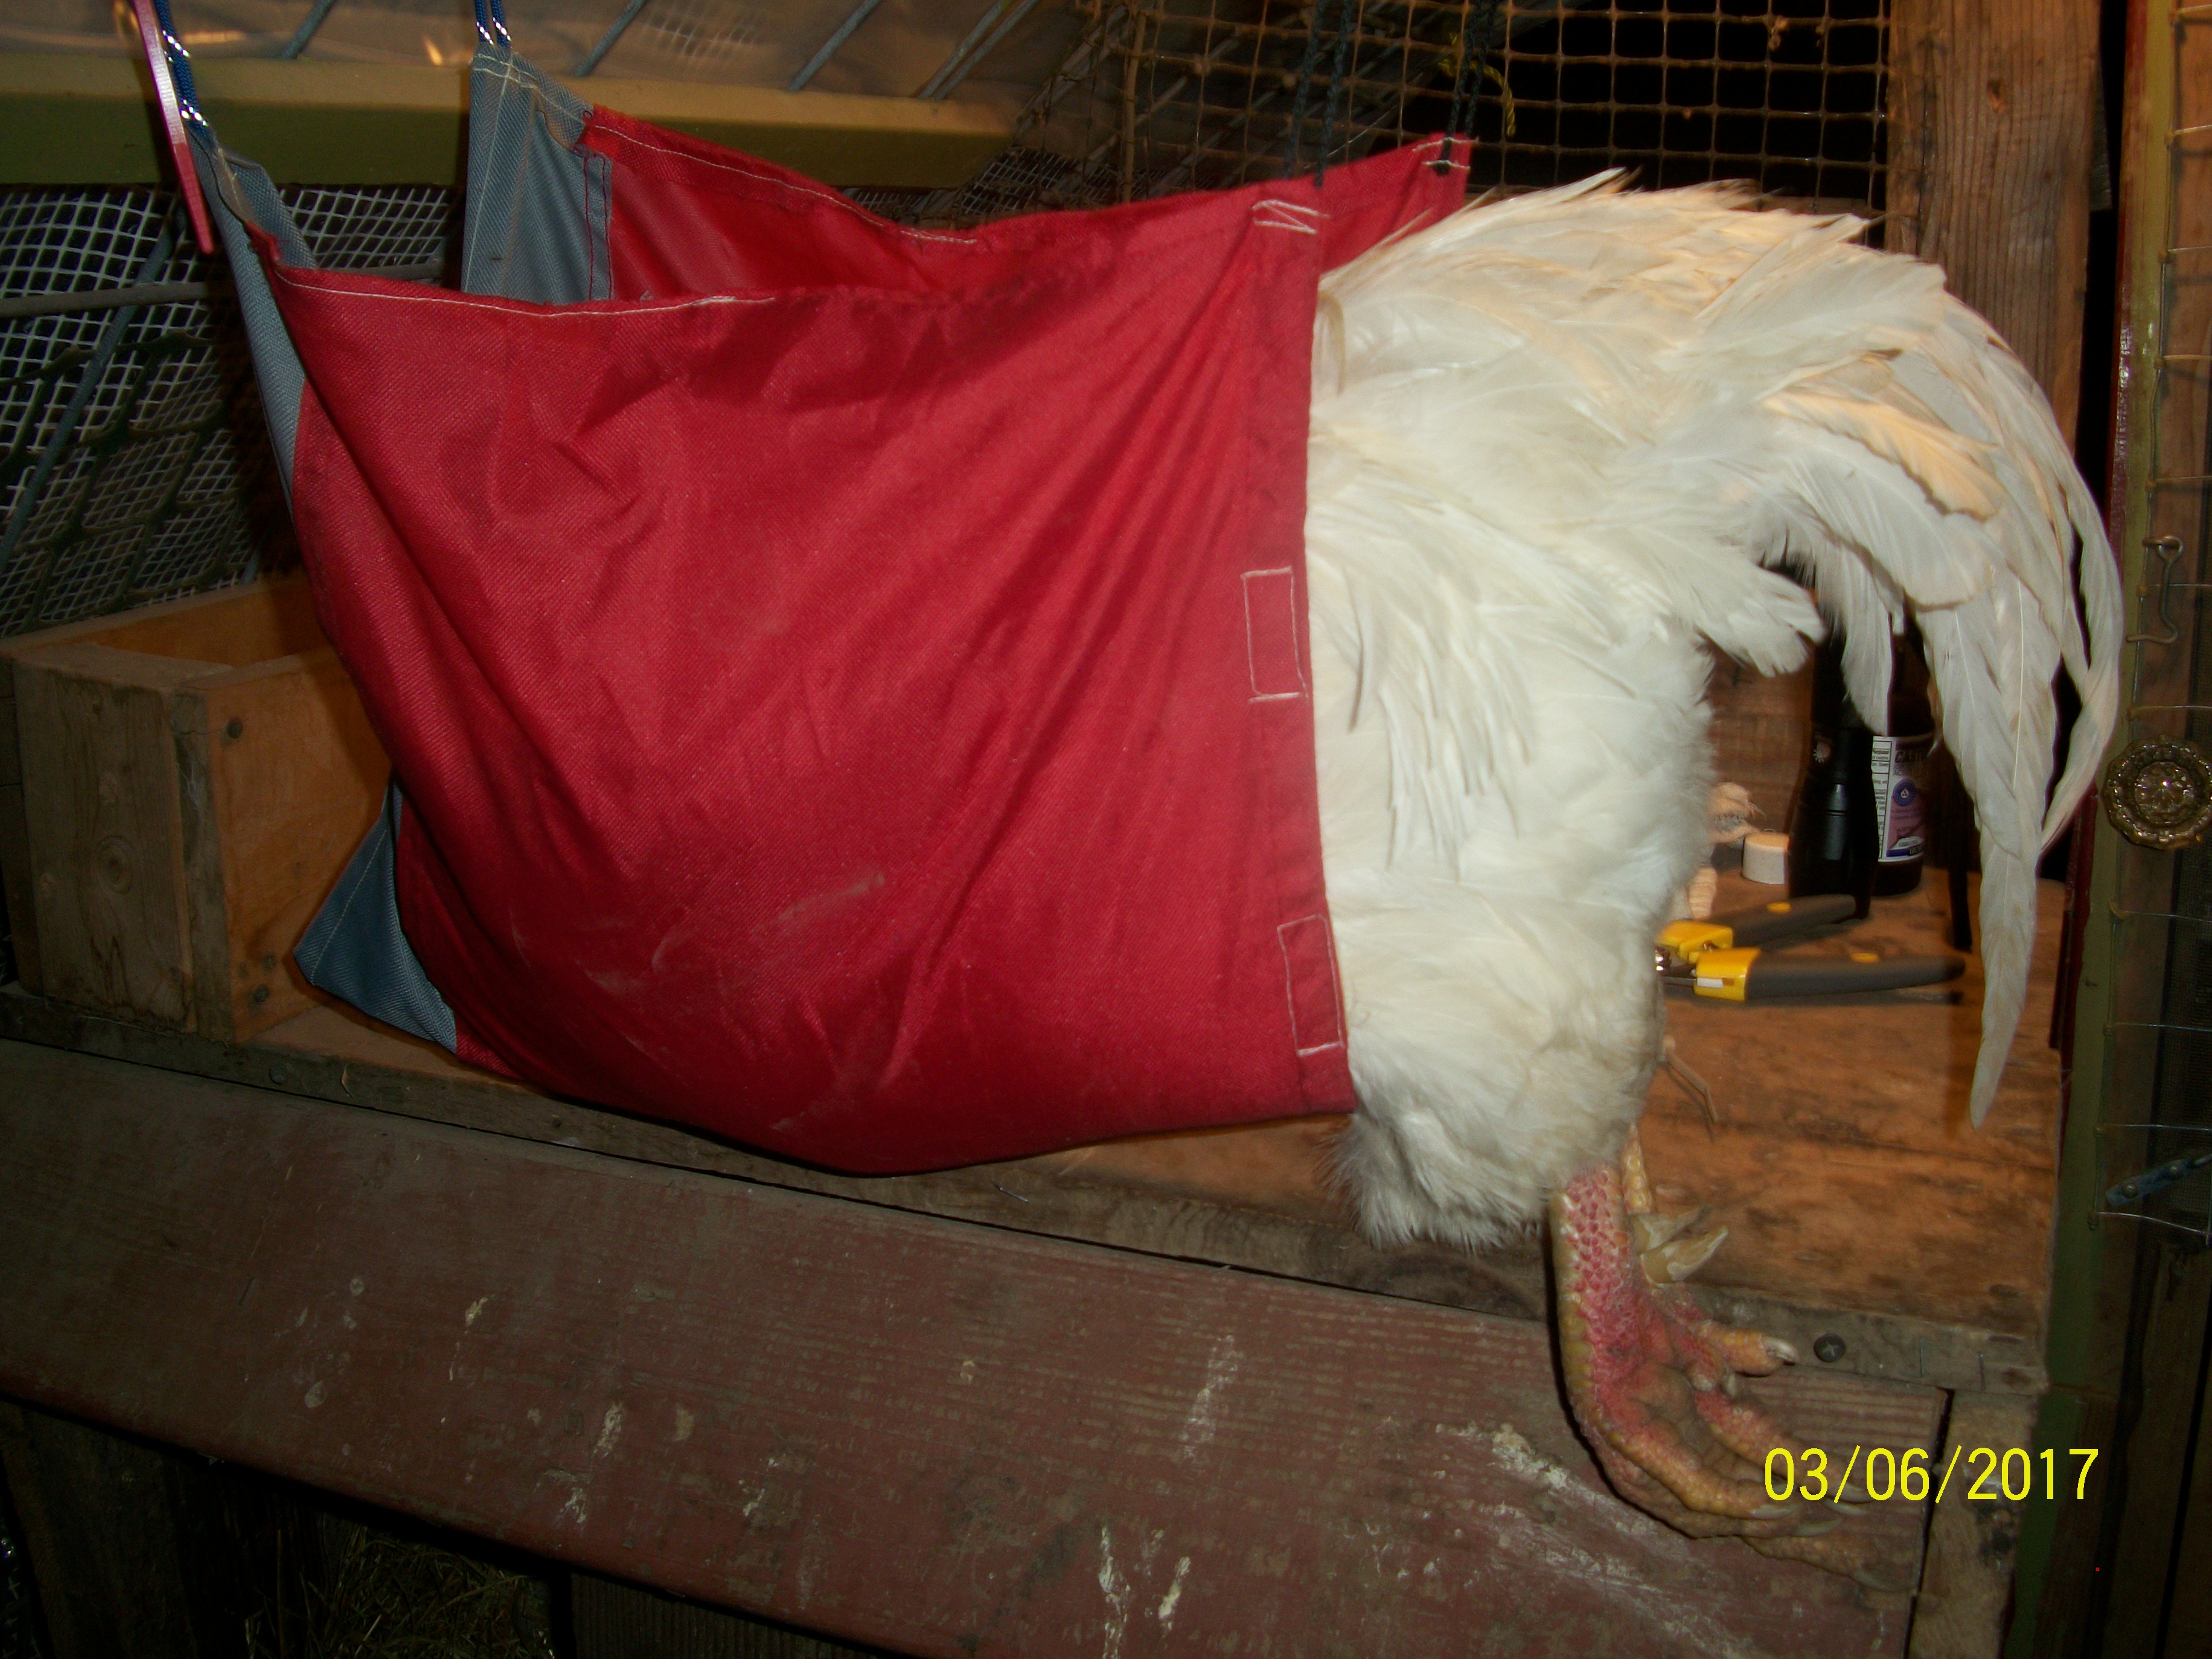 The chicken sling...for working on chickens when alone and needing hands free access.